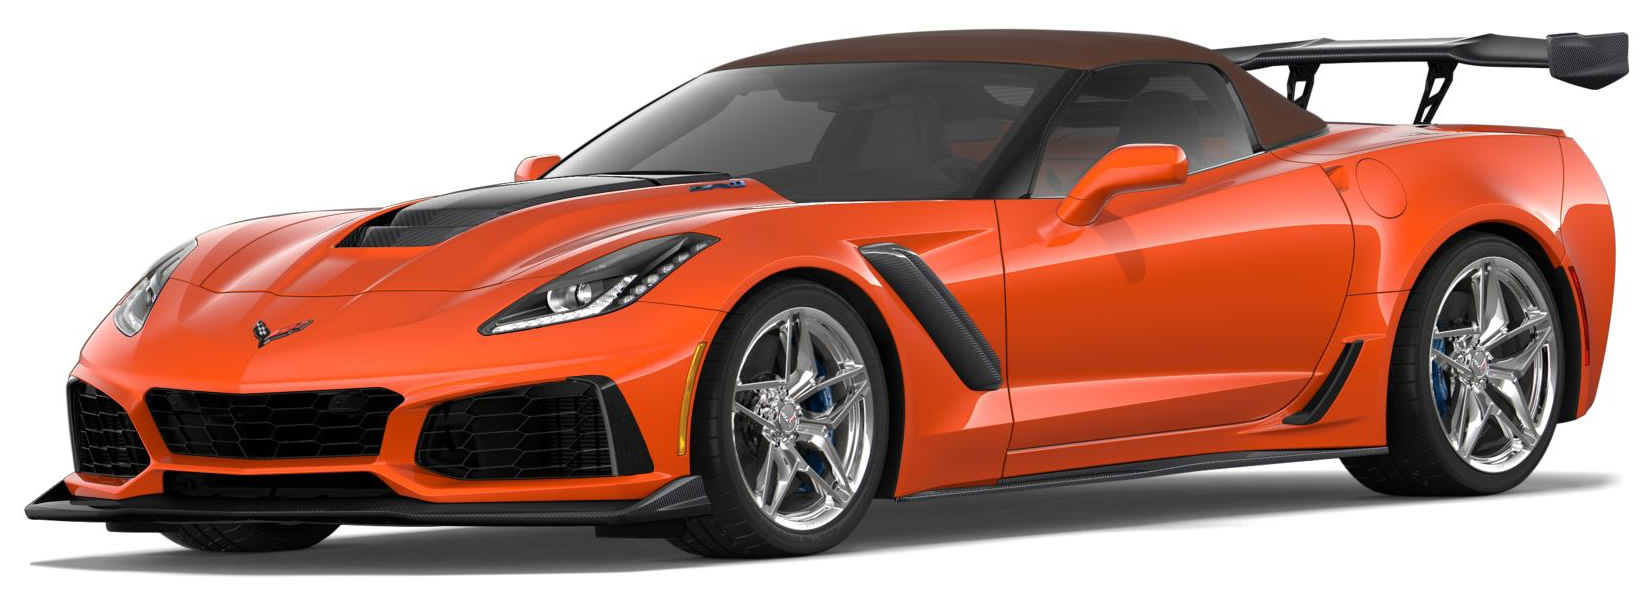 2019 Corvette ZR1 Convertible in Sebring Orange Metallic with the ZTK Track Performance Package and Chrome wheels